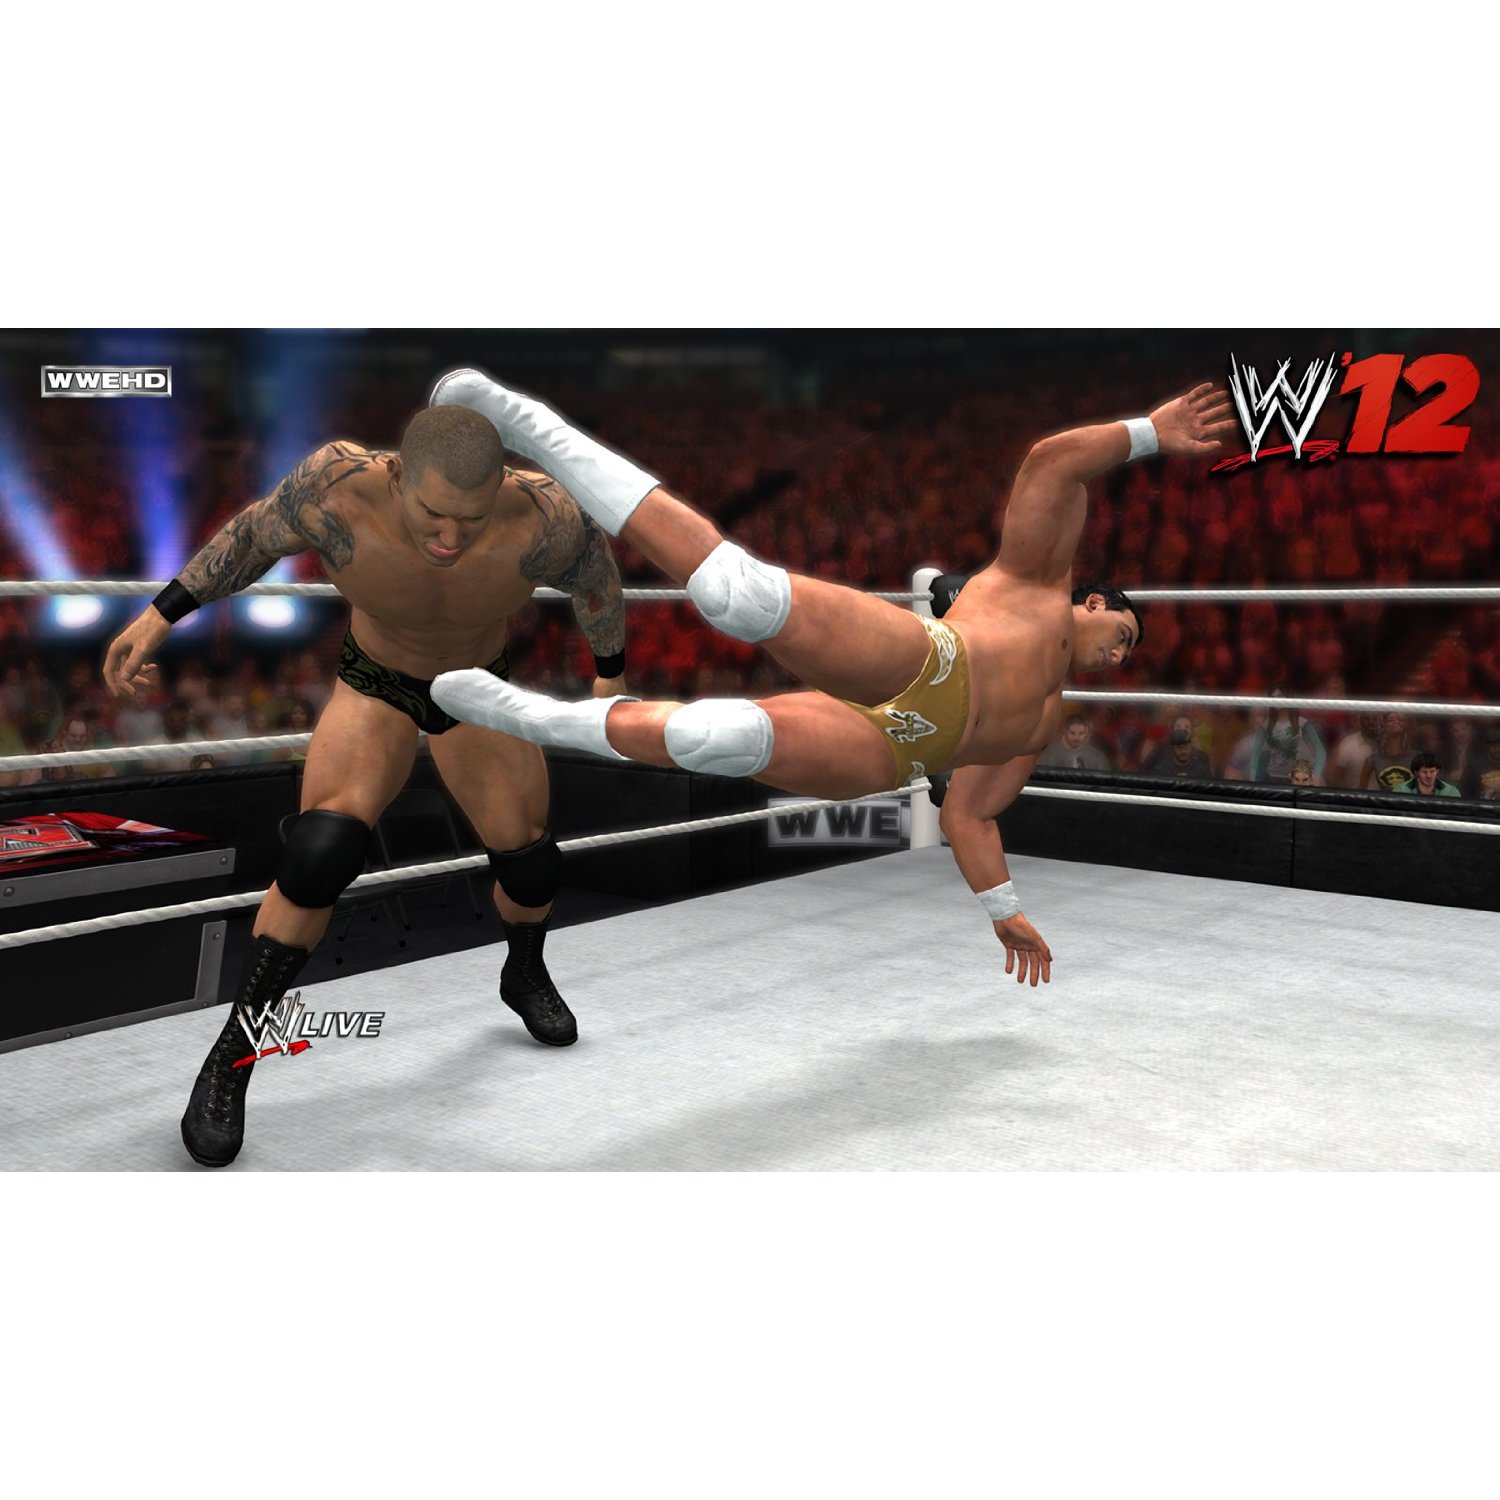 http://thetechjournal.com/wp-content/uploads/images/1111/1321270606-wwe-12--game-available-in-amazon-for-preorder-7.jpg